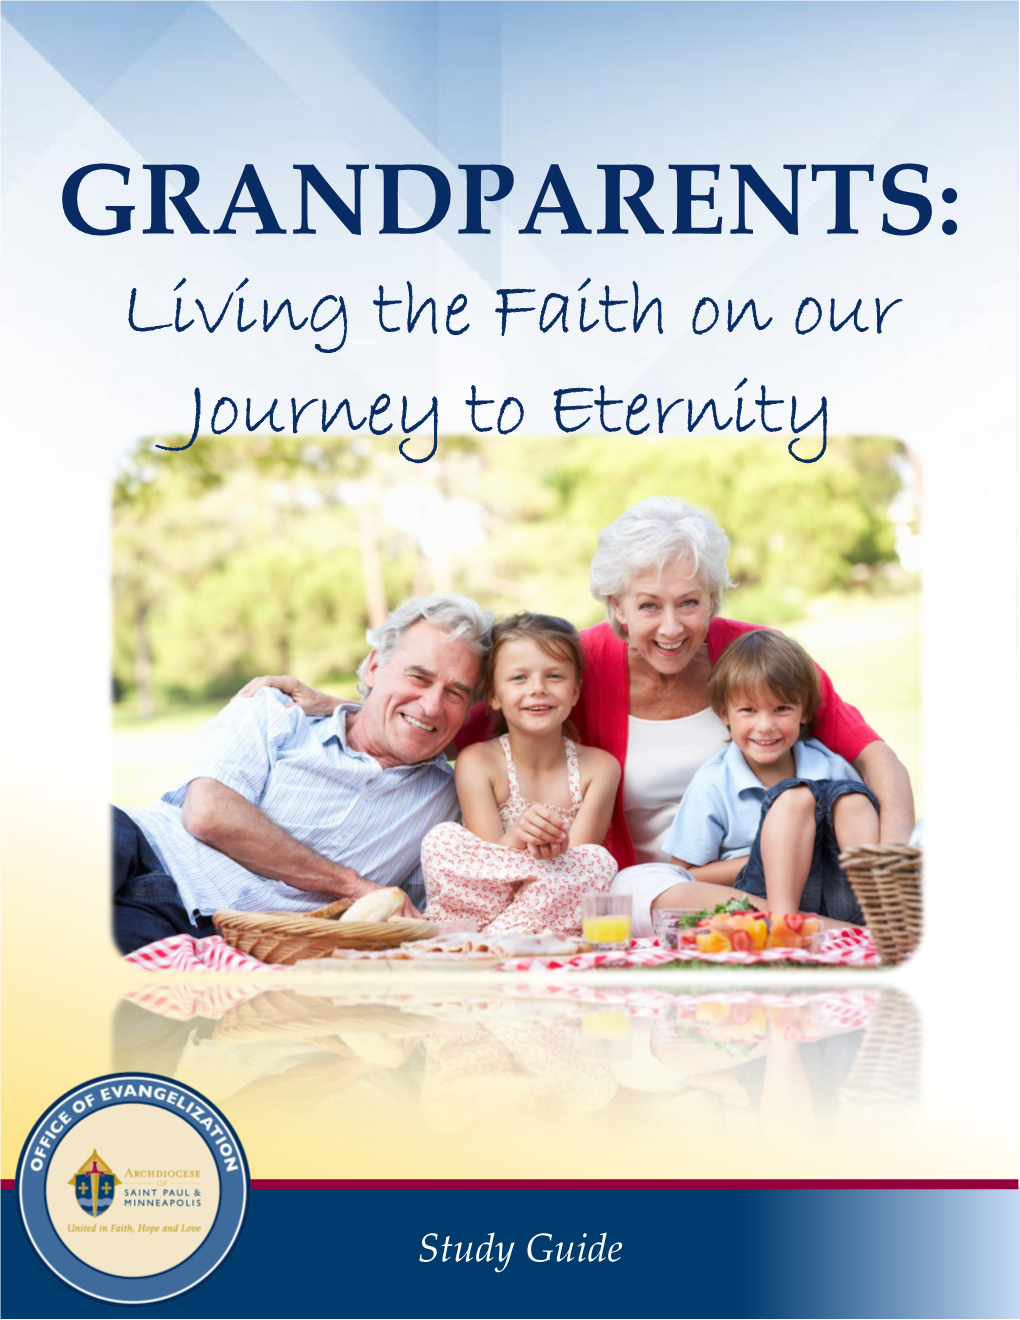 GRANDPARENTS: Living the Faith on Our Journey to Eternity